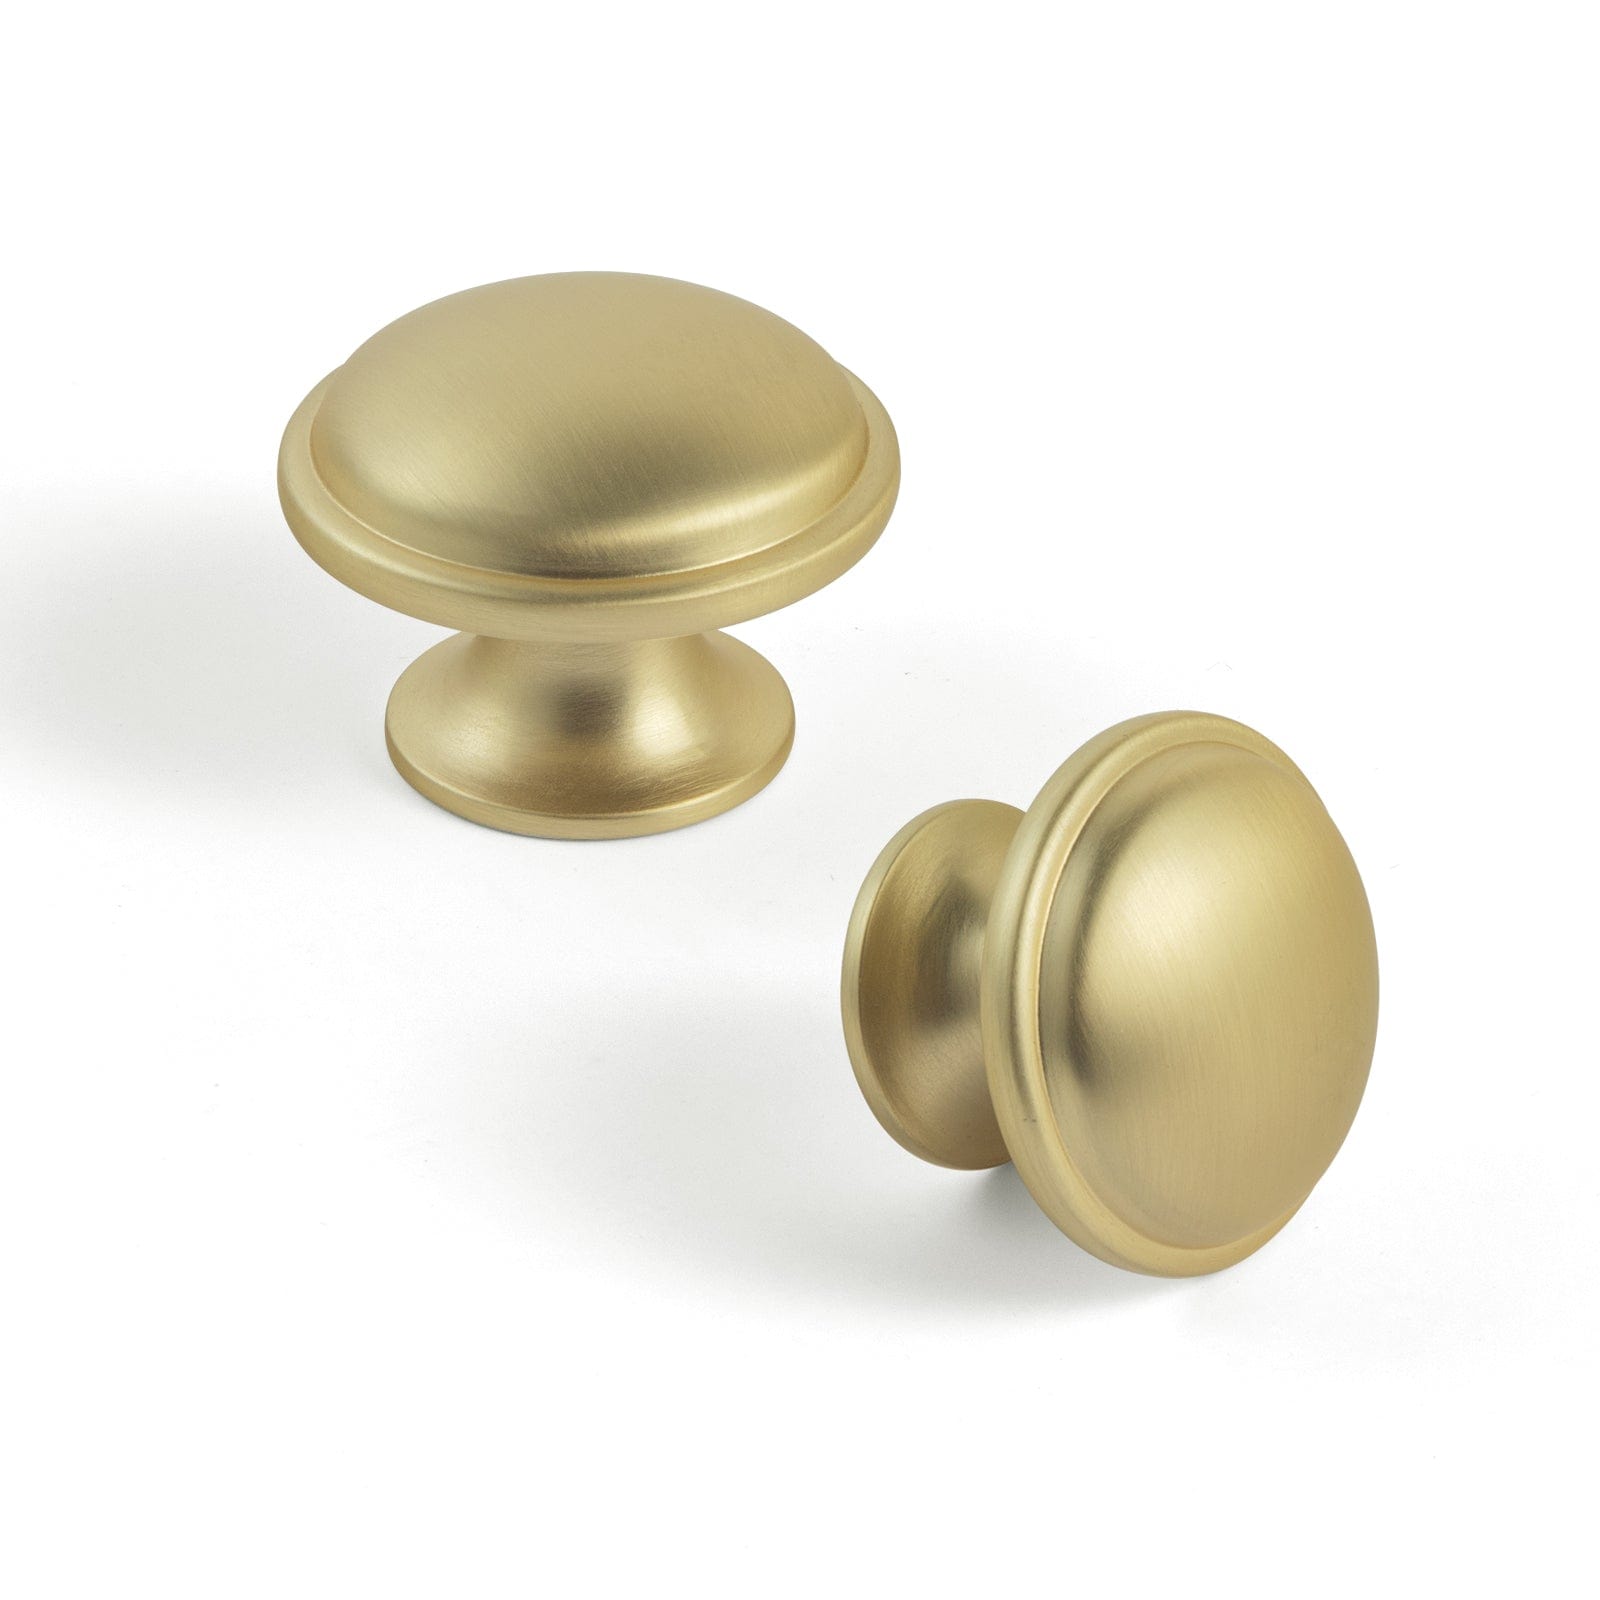 Goo-Ki Brushed Brass / Knob / 12 Pack Antique Brass Cabinet Handles Timeless Drawer Pulls for Classic Furniture Revival